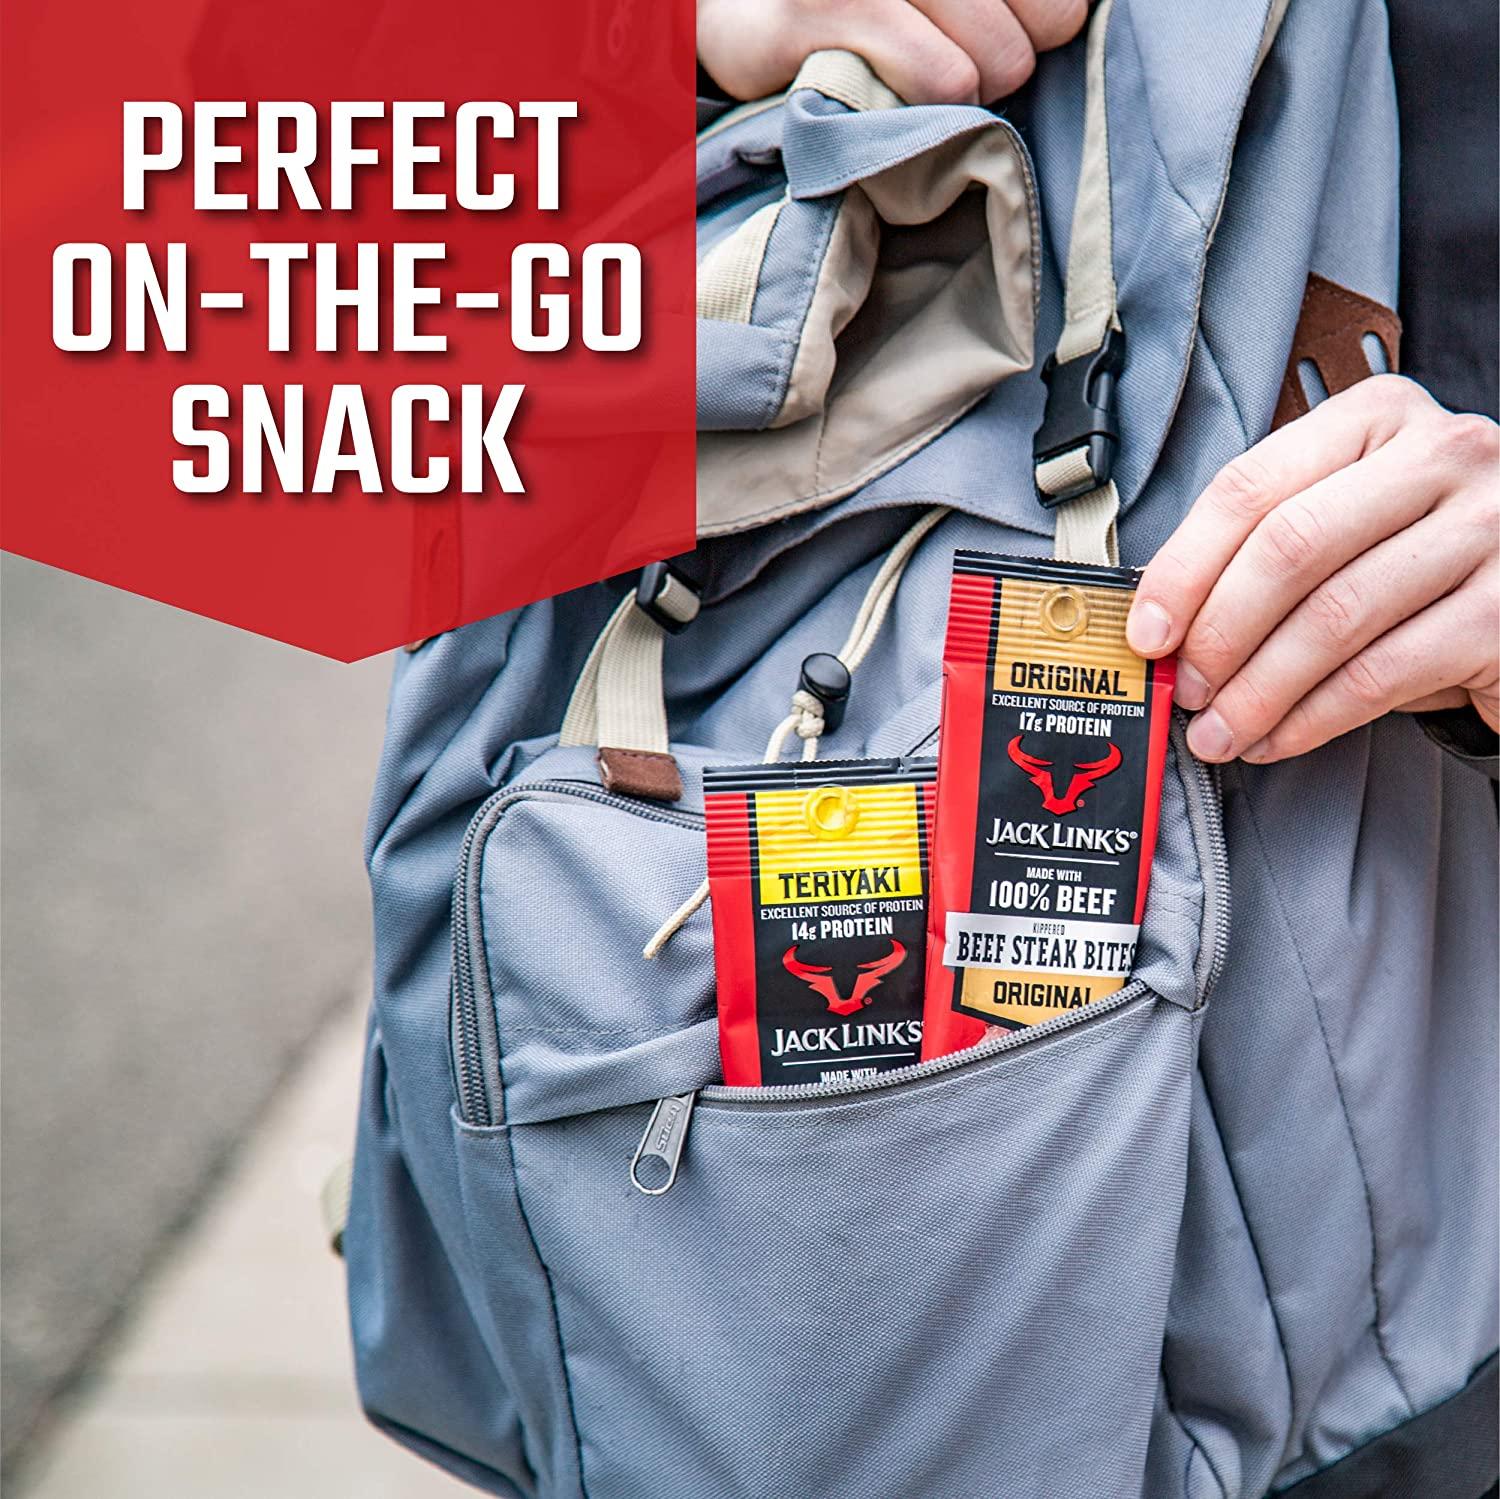 On the Go Snack Bag